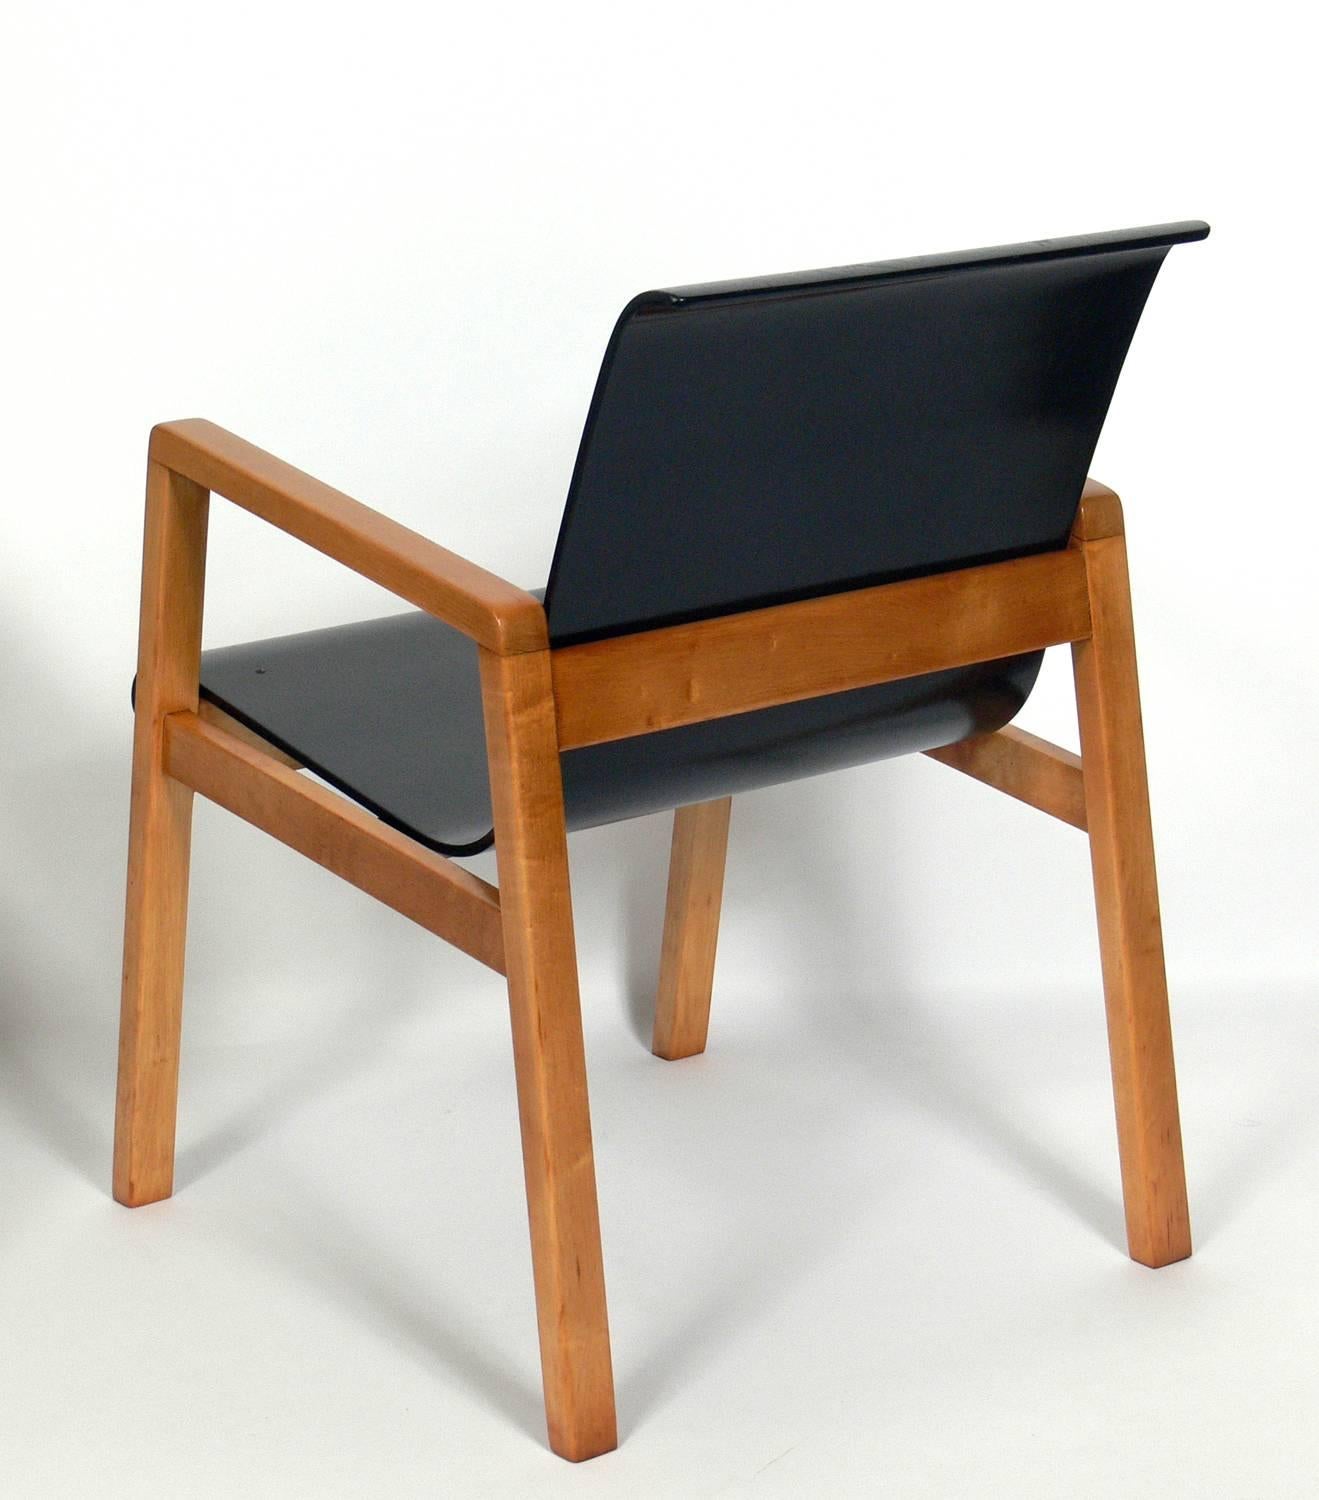 Finnish Pair of Bentwood Modern Lounge Chairs Designed by Alvar Aalto, circa 1940s